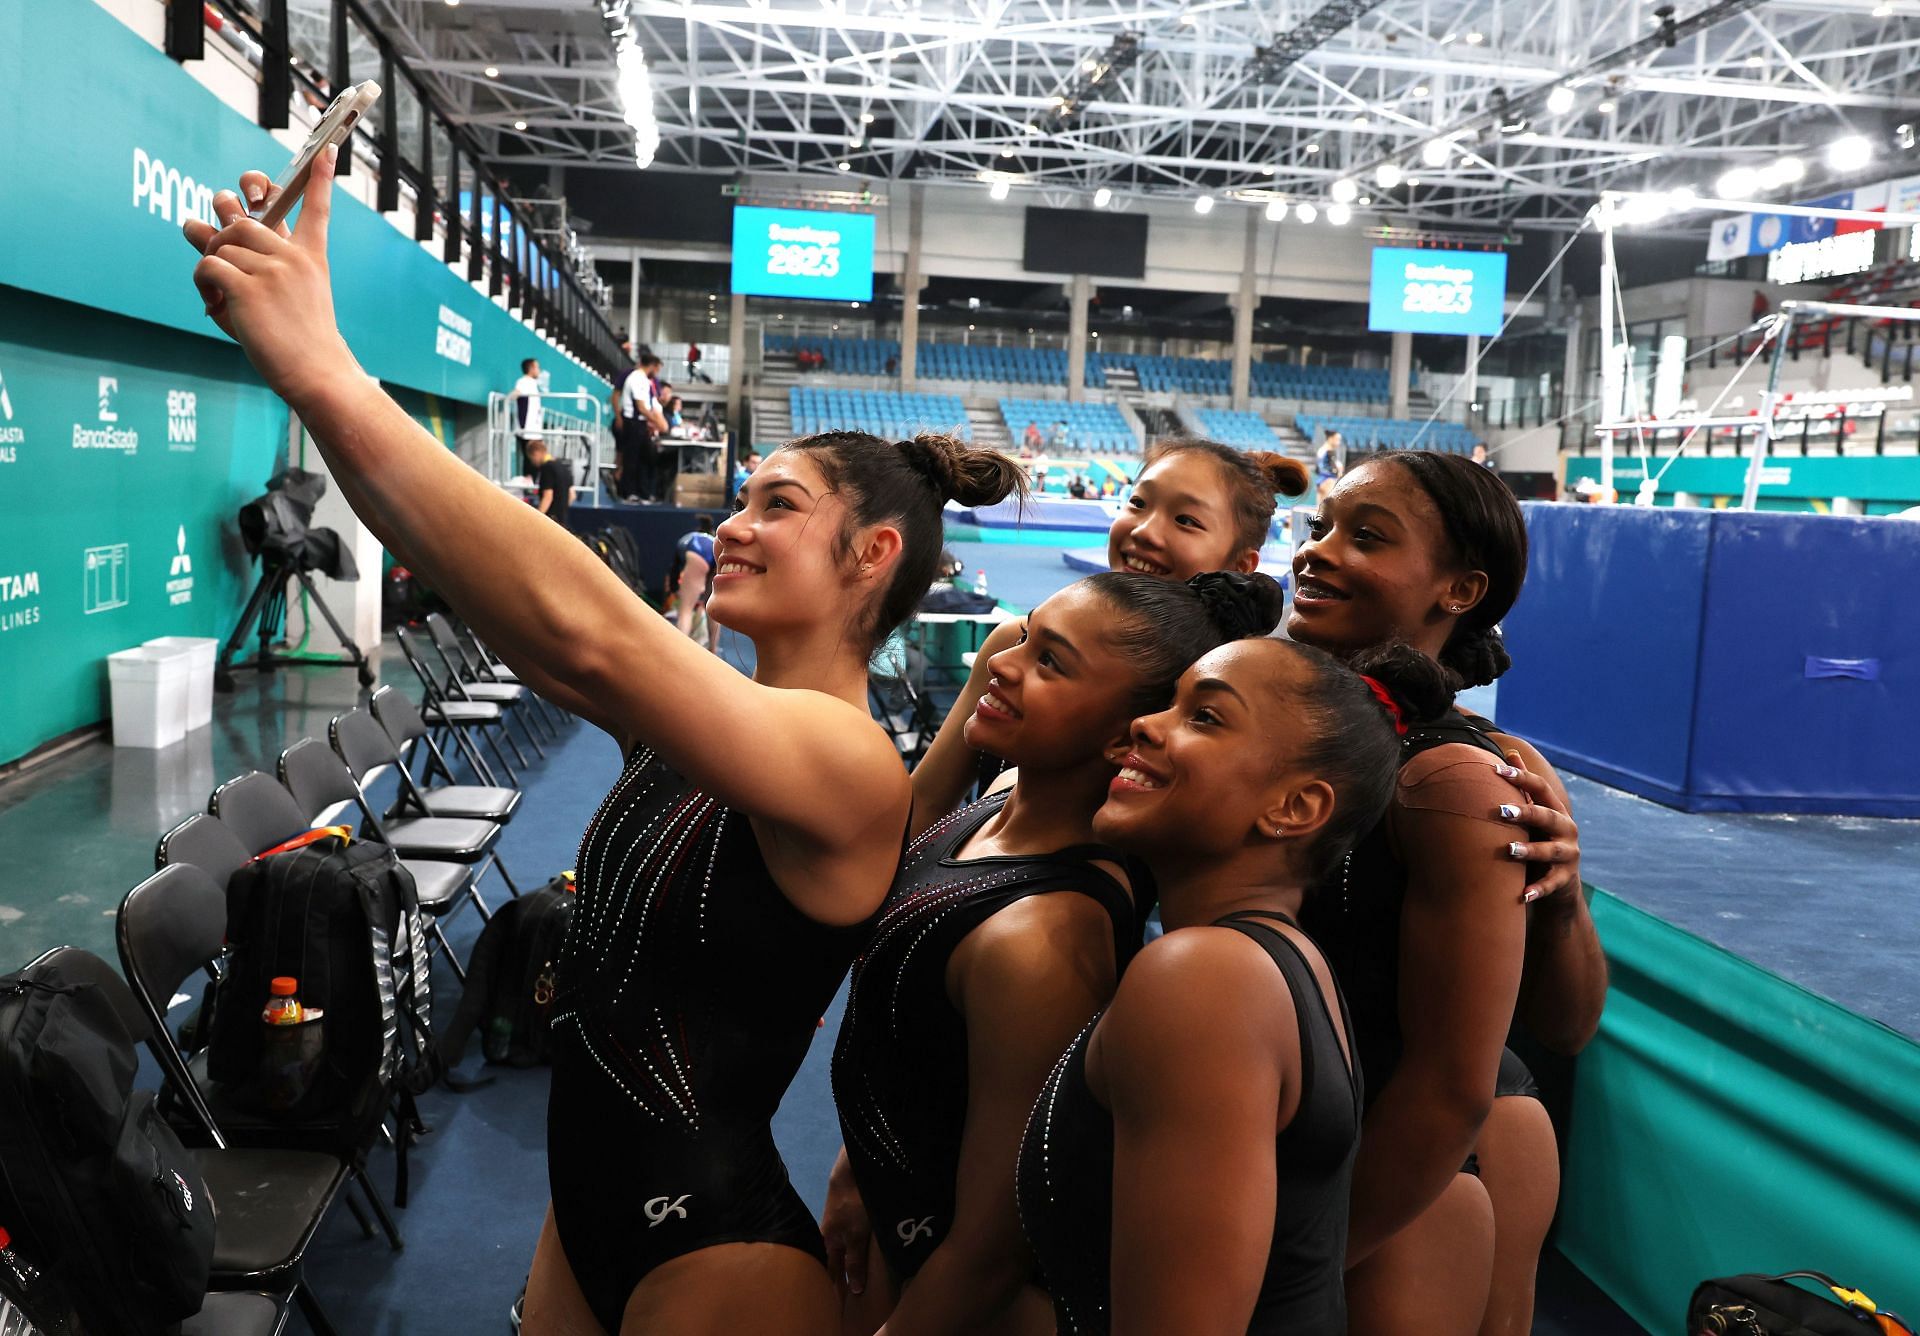 Kayla DiCello and Team USA pose for a selfie after a training session at the 2023 Pan American Games in Santiago, Chile.